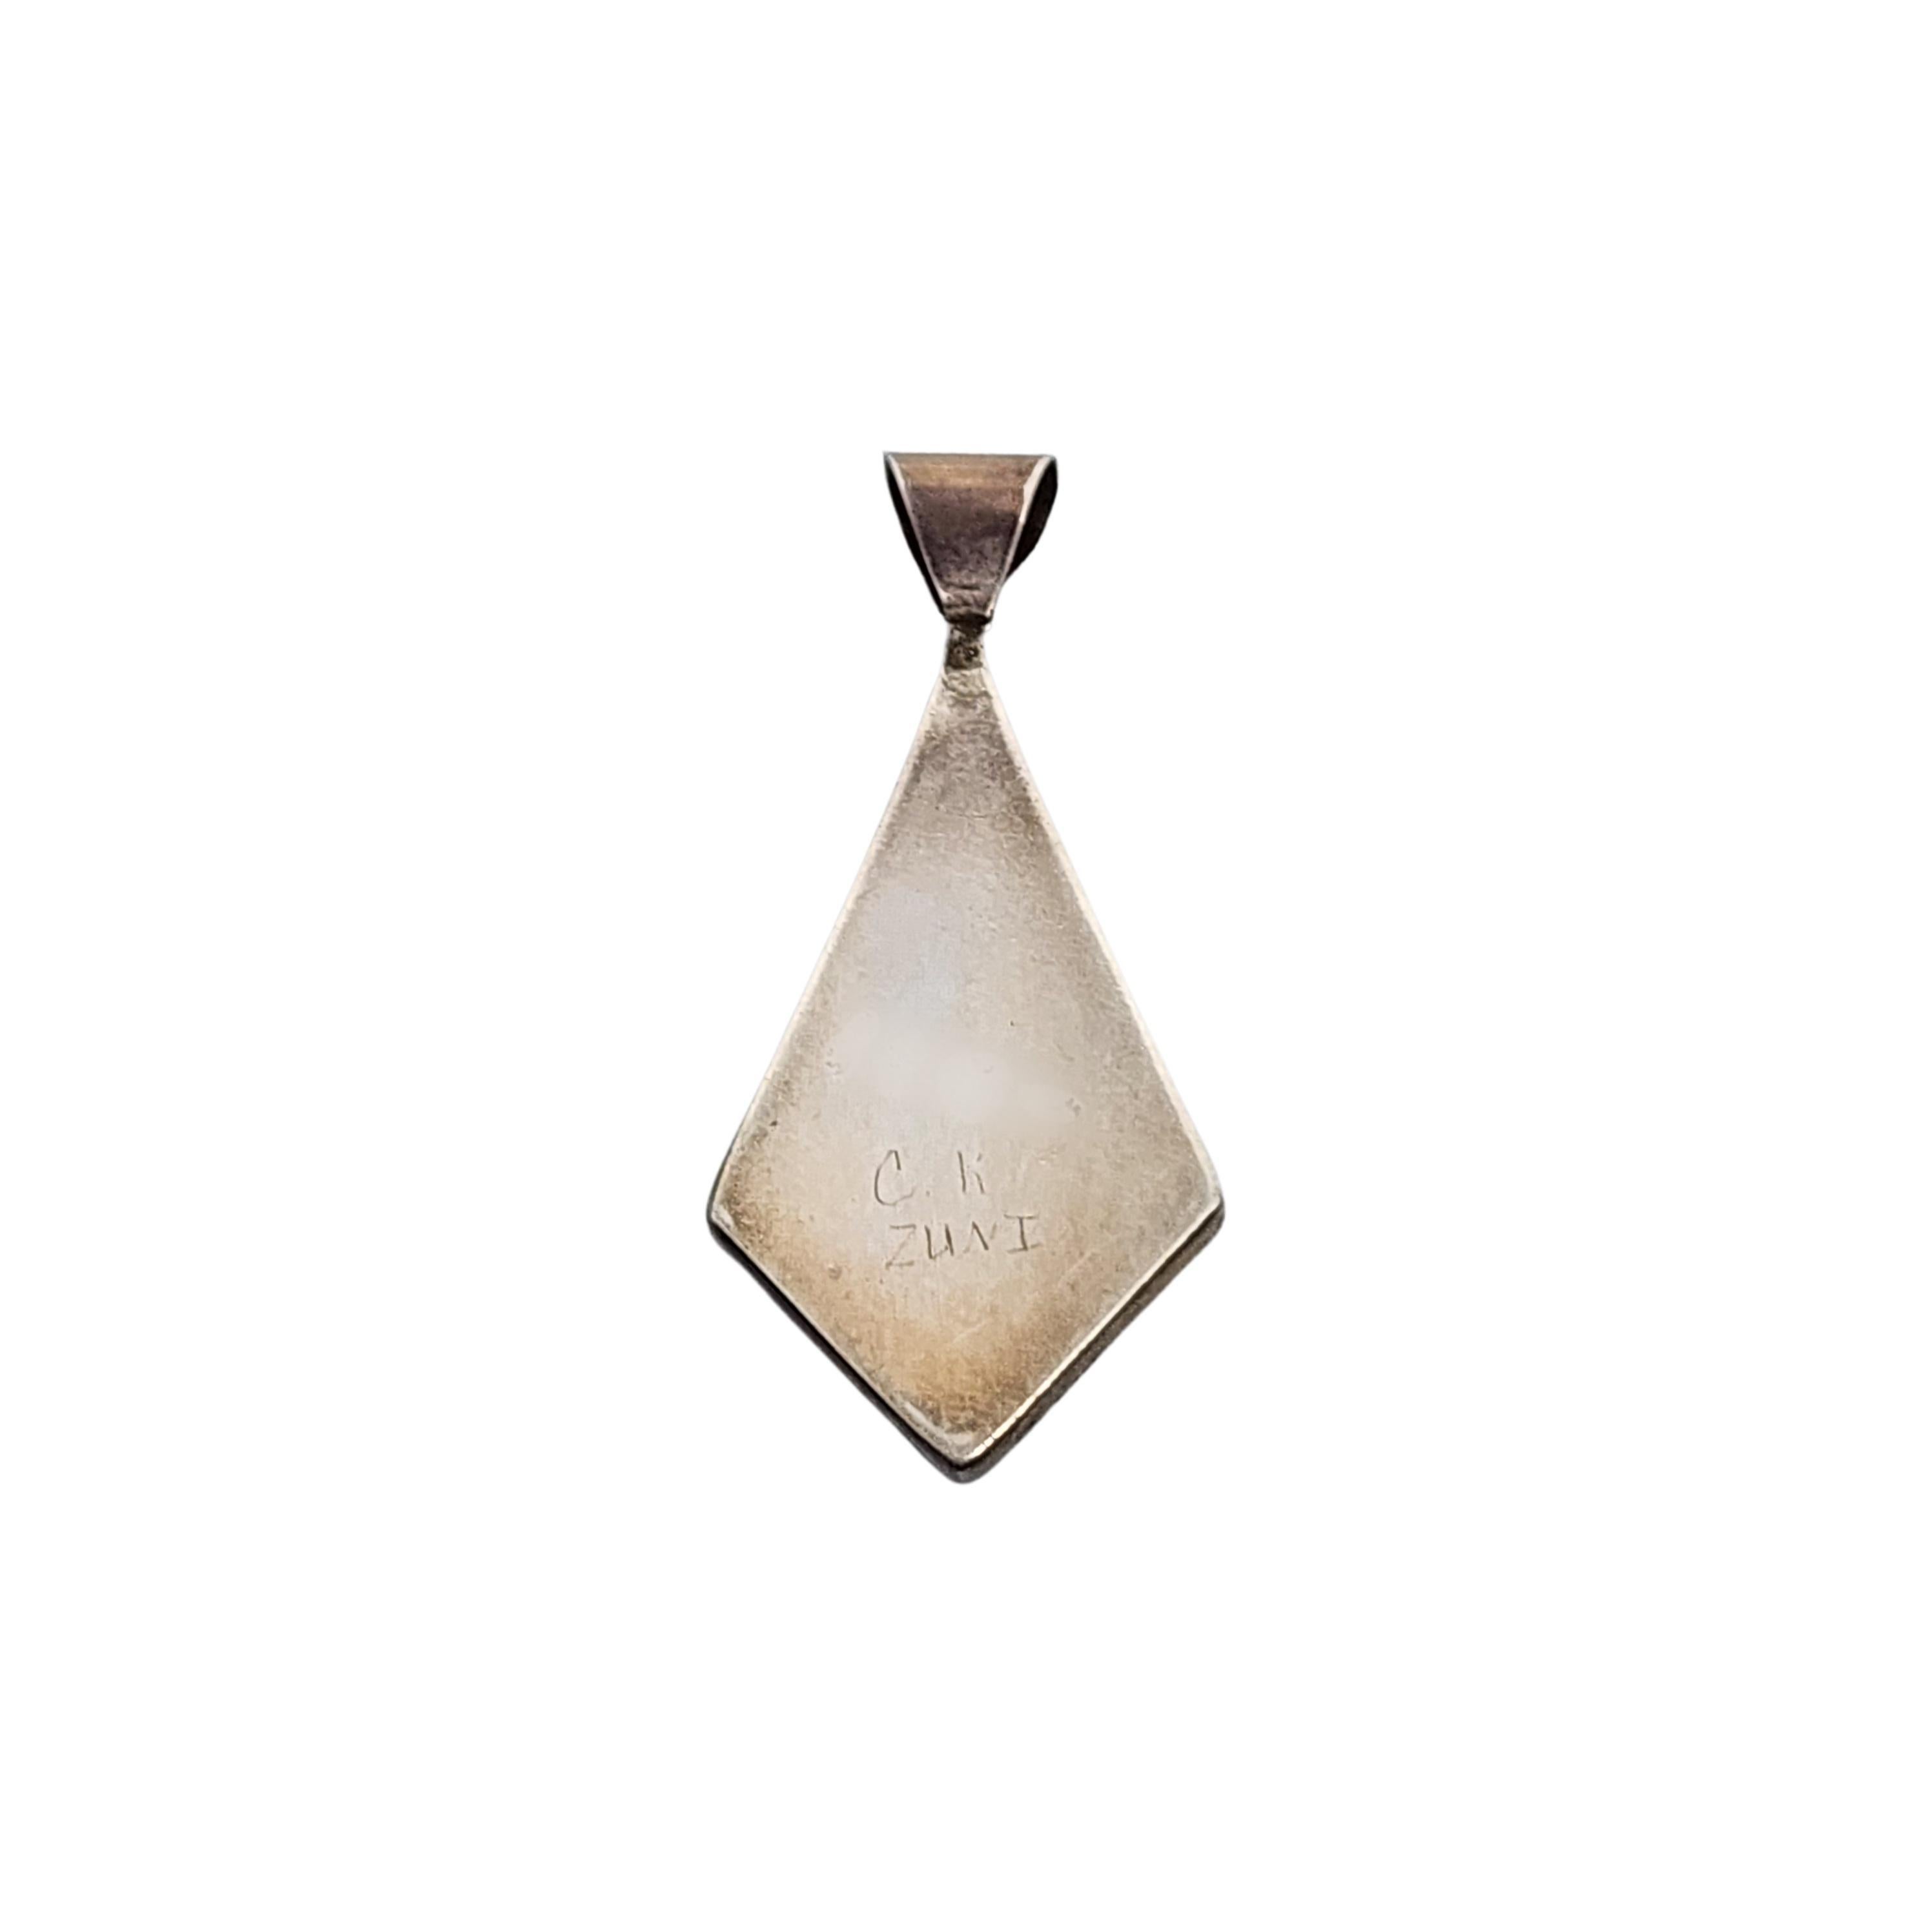 Sterling silver multi stone inlay pendant by Native American Zuni artisan, CK.

Beautiful inlay stone design appear to be mother of pearl, turquoise, onyx and coral, bezel set in a diamond shaped pendant with a large bale.

Measures approx 1 9/16